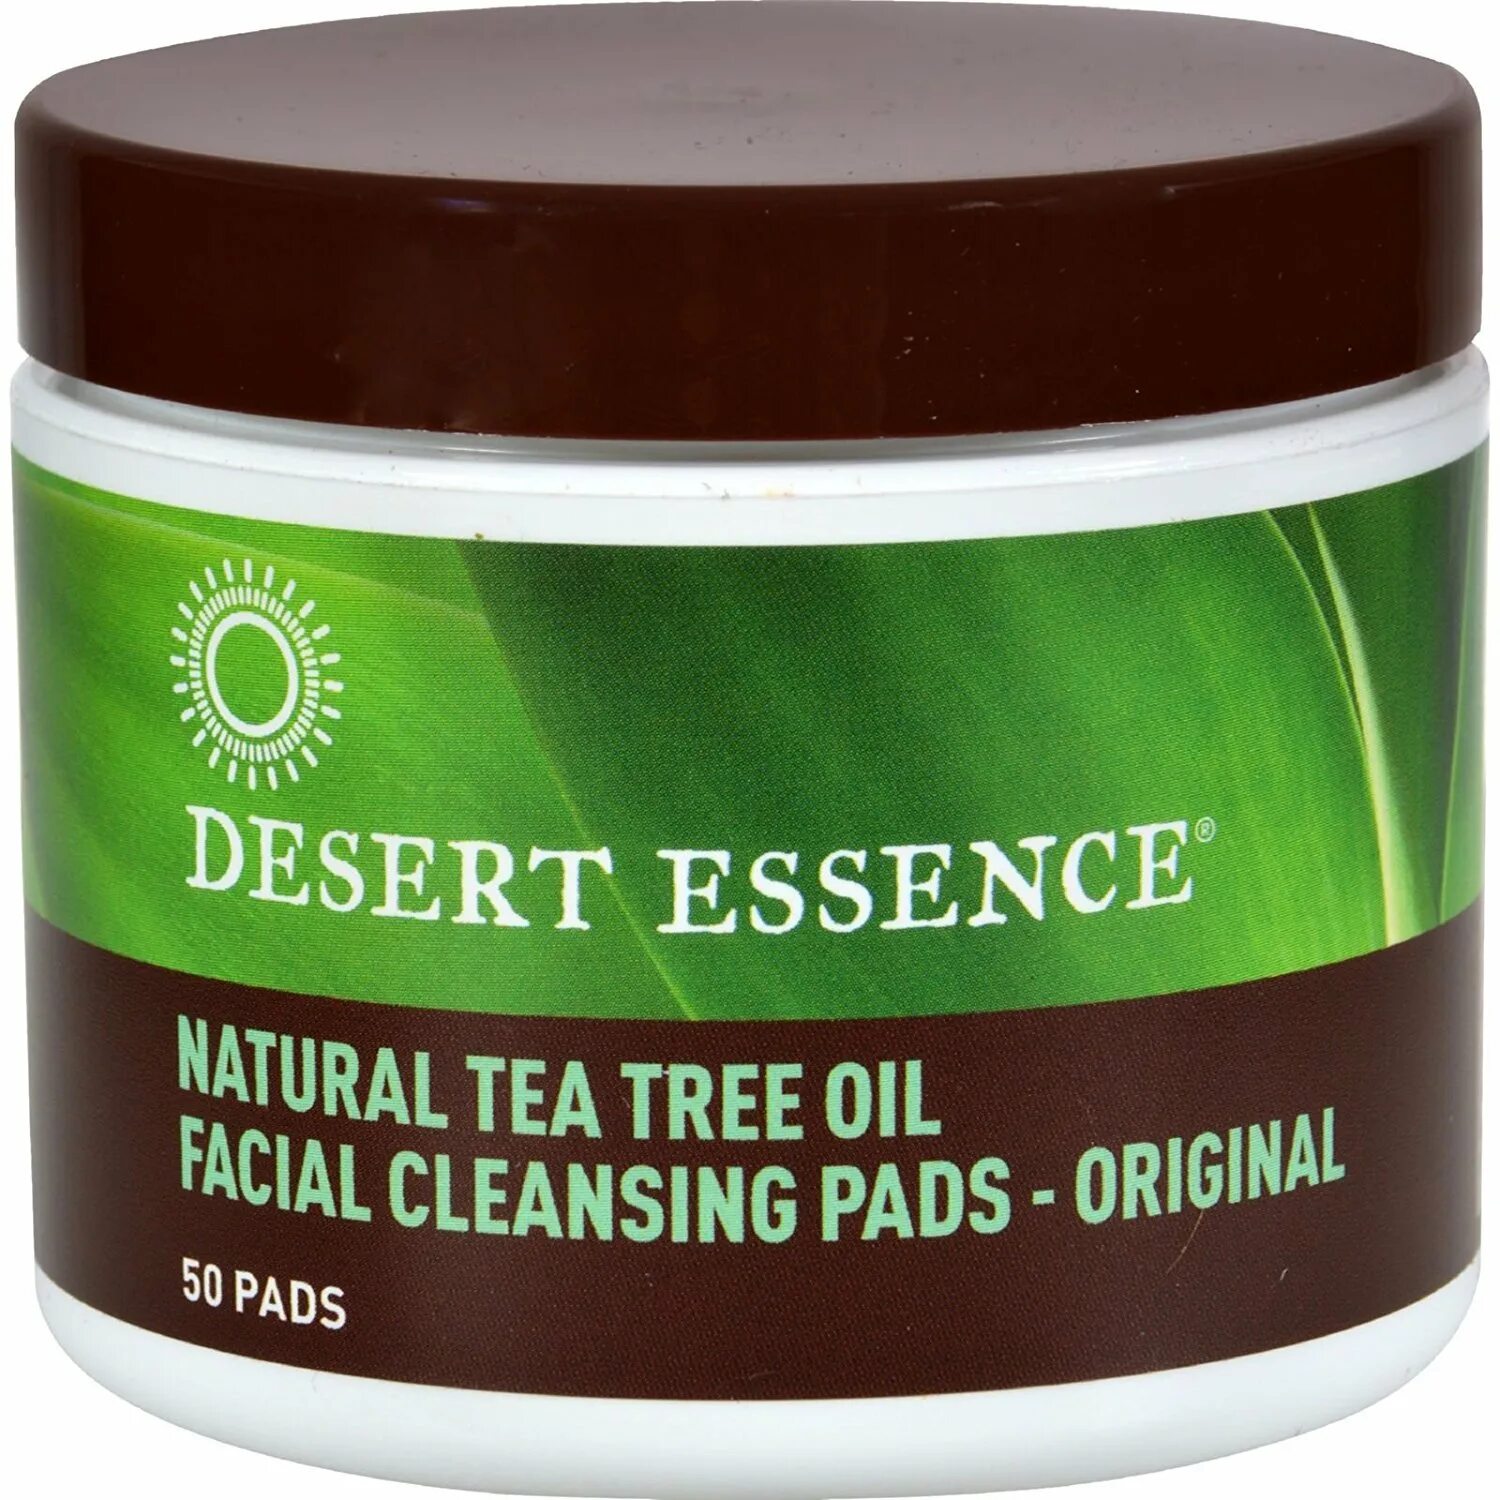 Cleansing Pads. Essence facial Cleanser. Facial Cleanser Эссенс. Natural essence